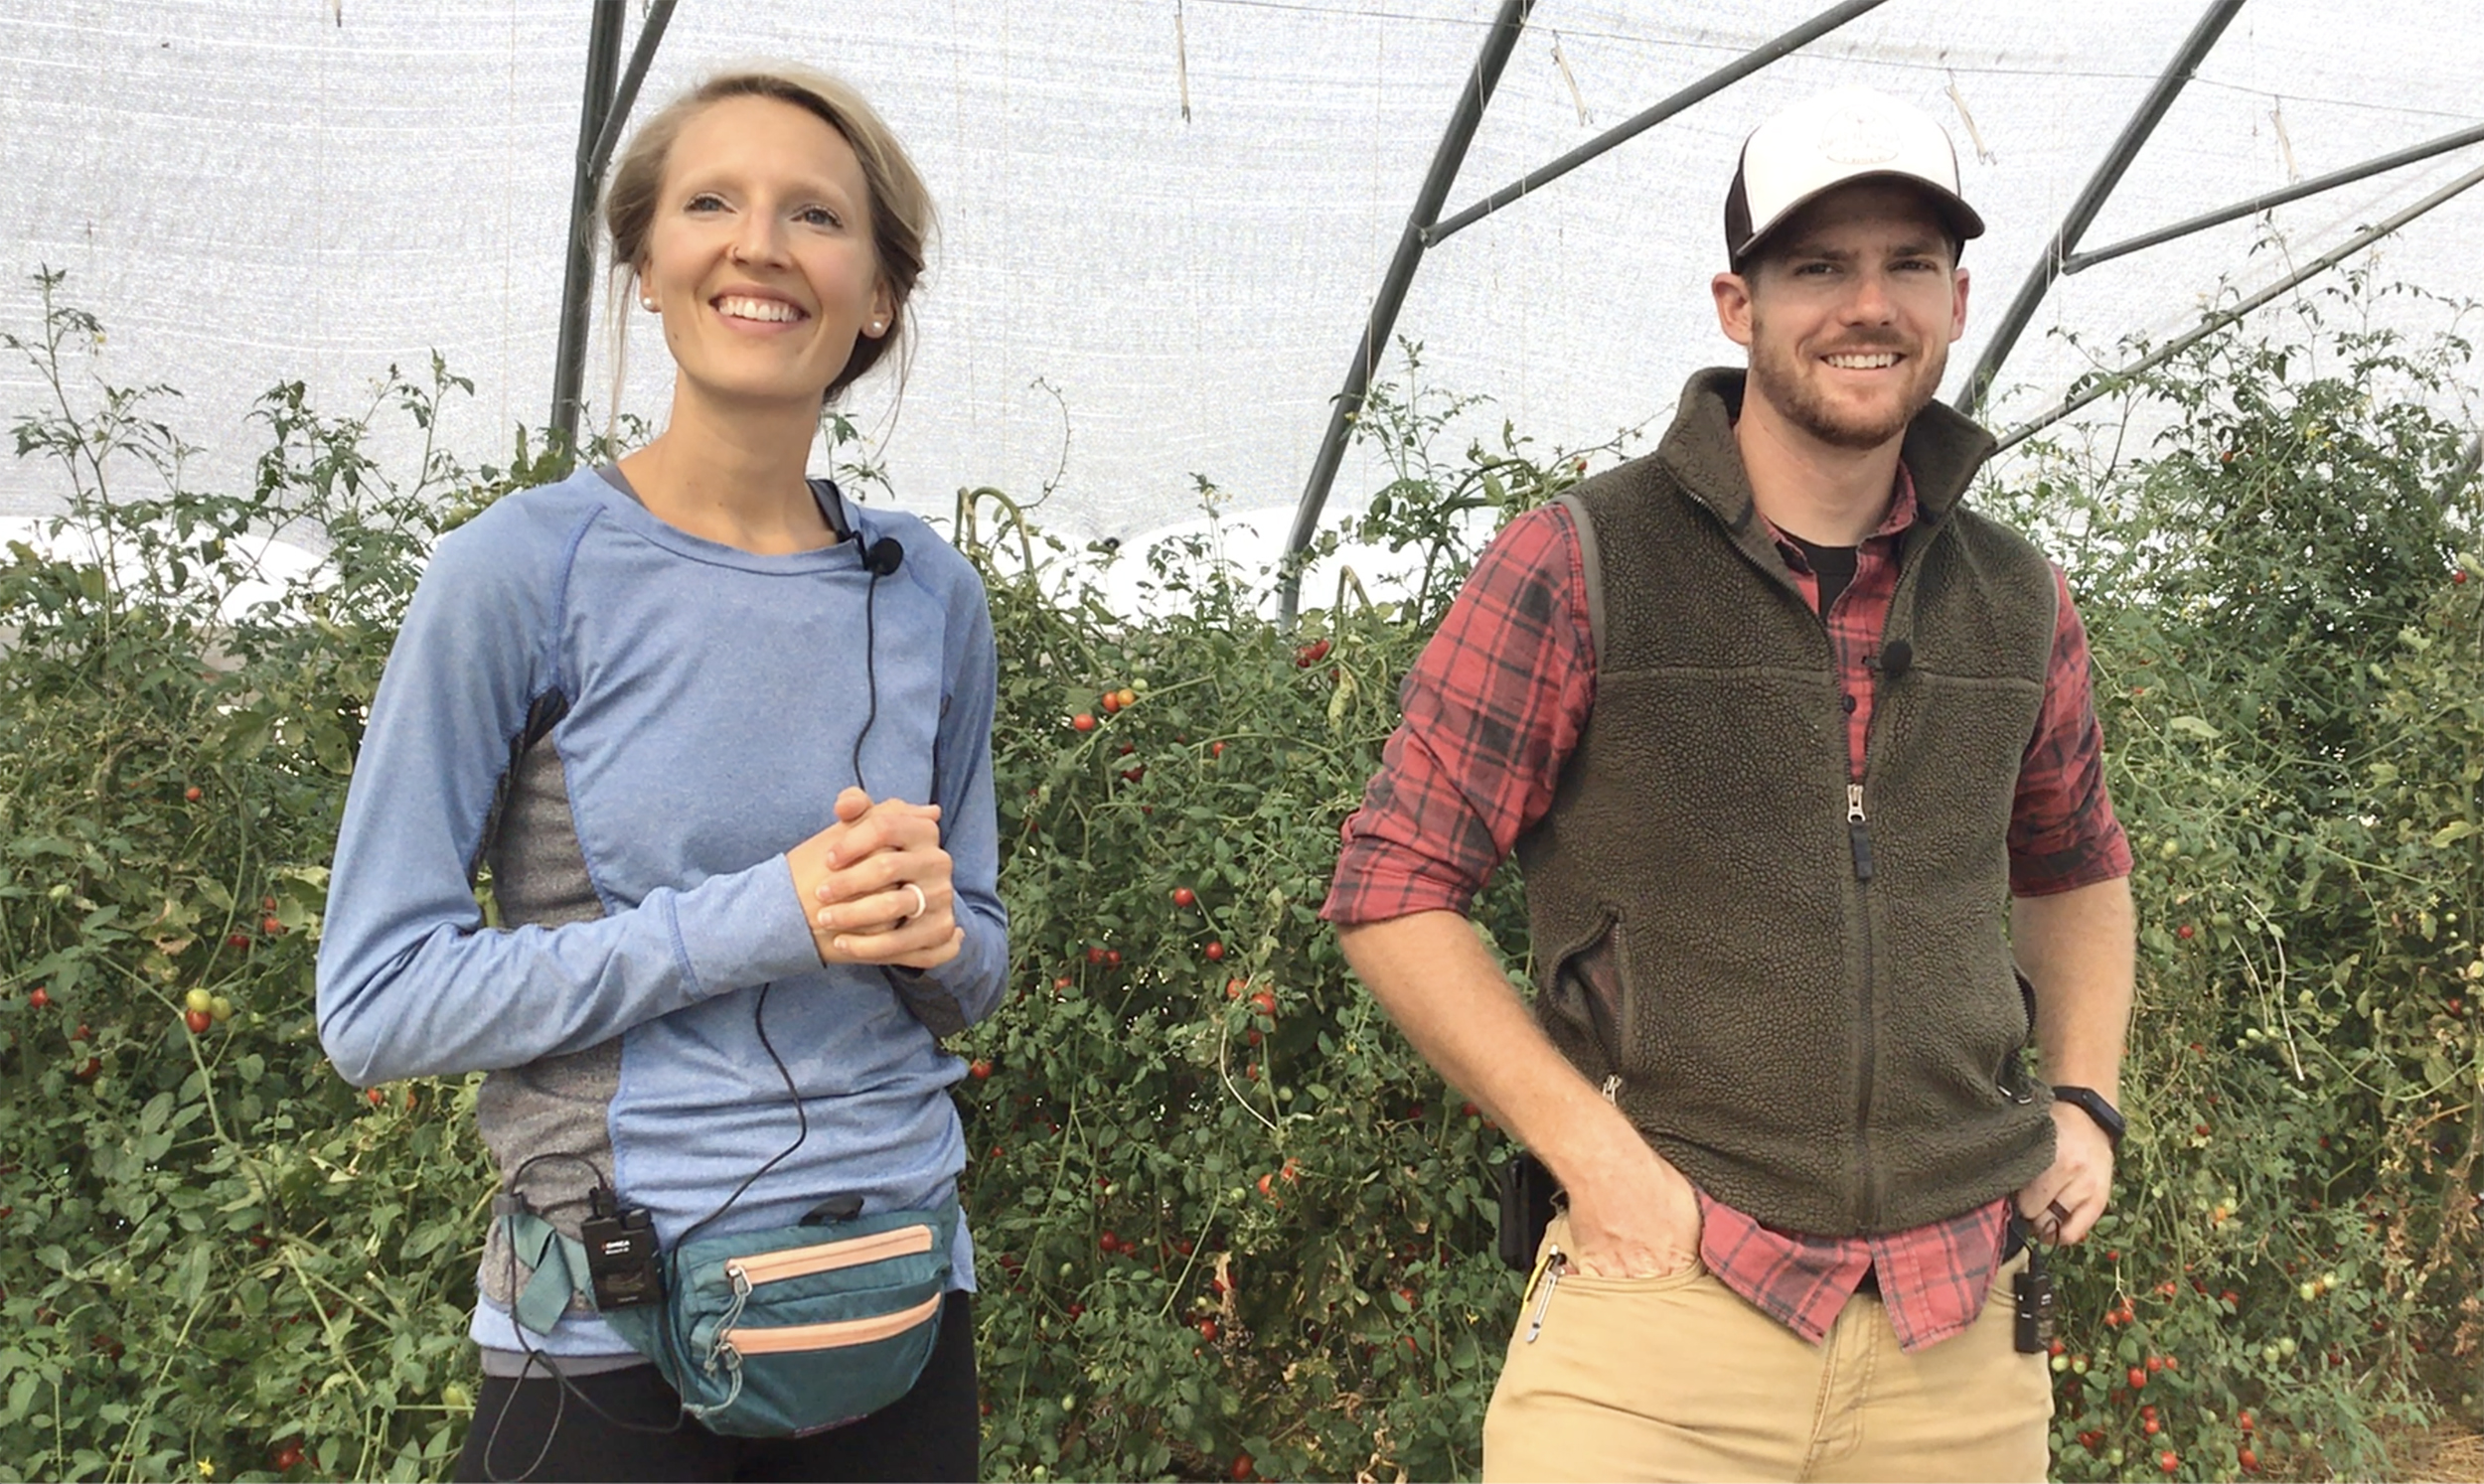 Food Safety Spotlight: Kansas Farmers Union Connects with Urban Growers On-Farm and Online